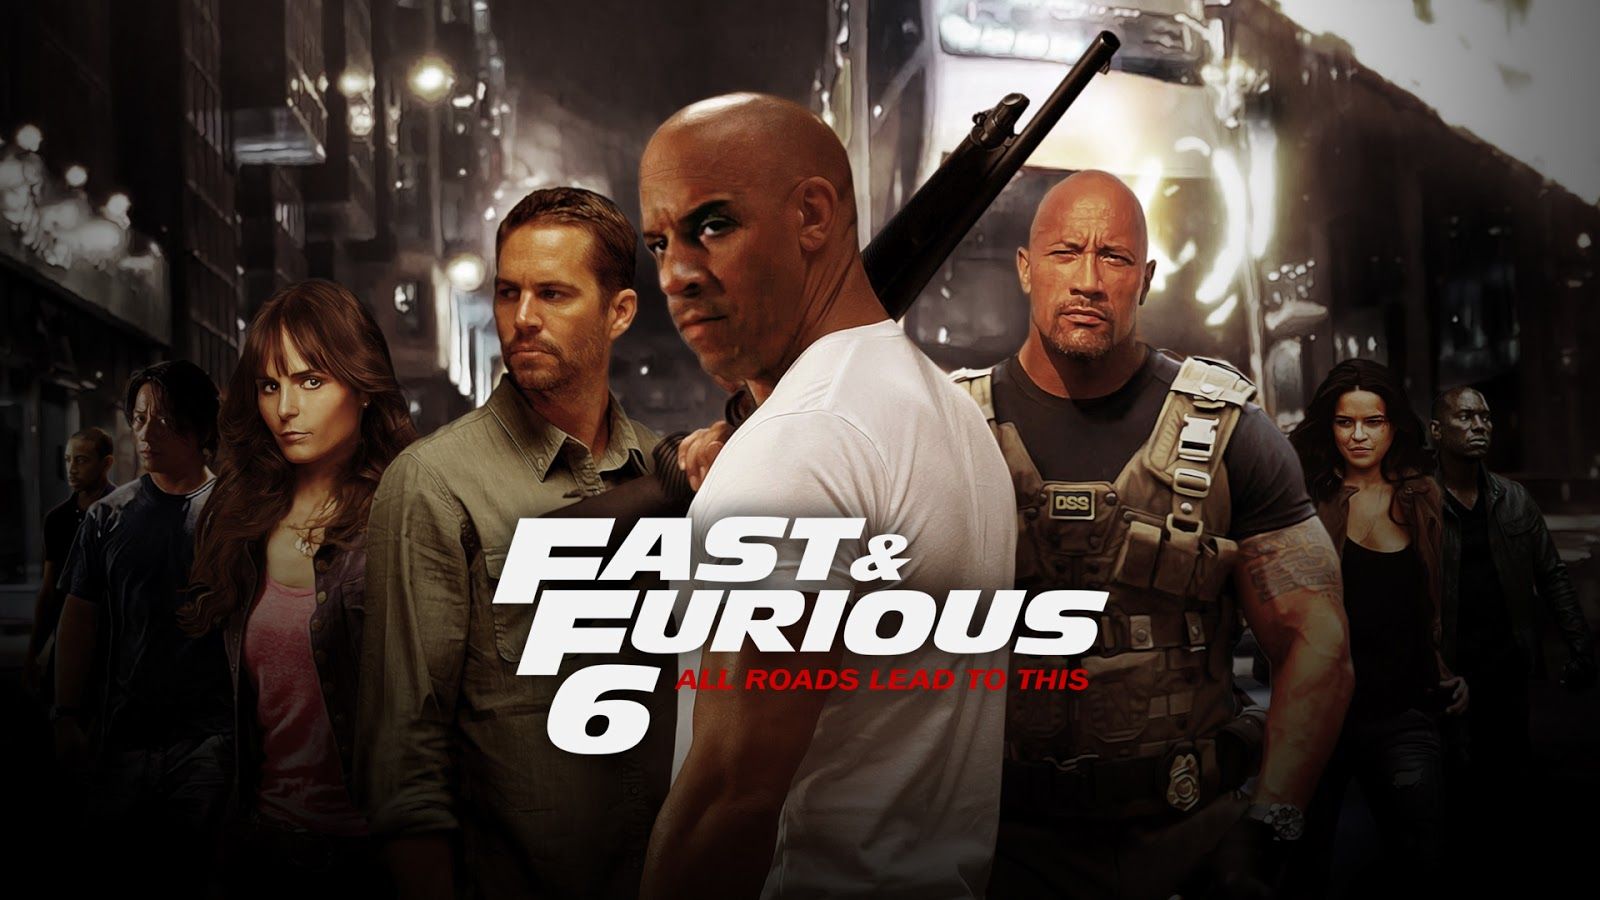 Free download furious 6 wallpaper HD fast and furious 6